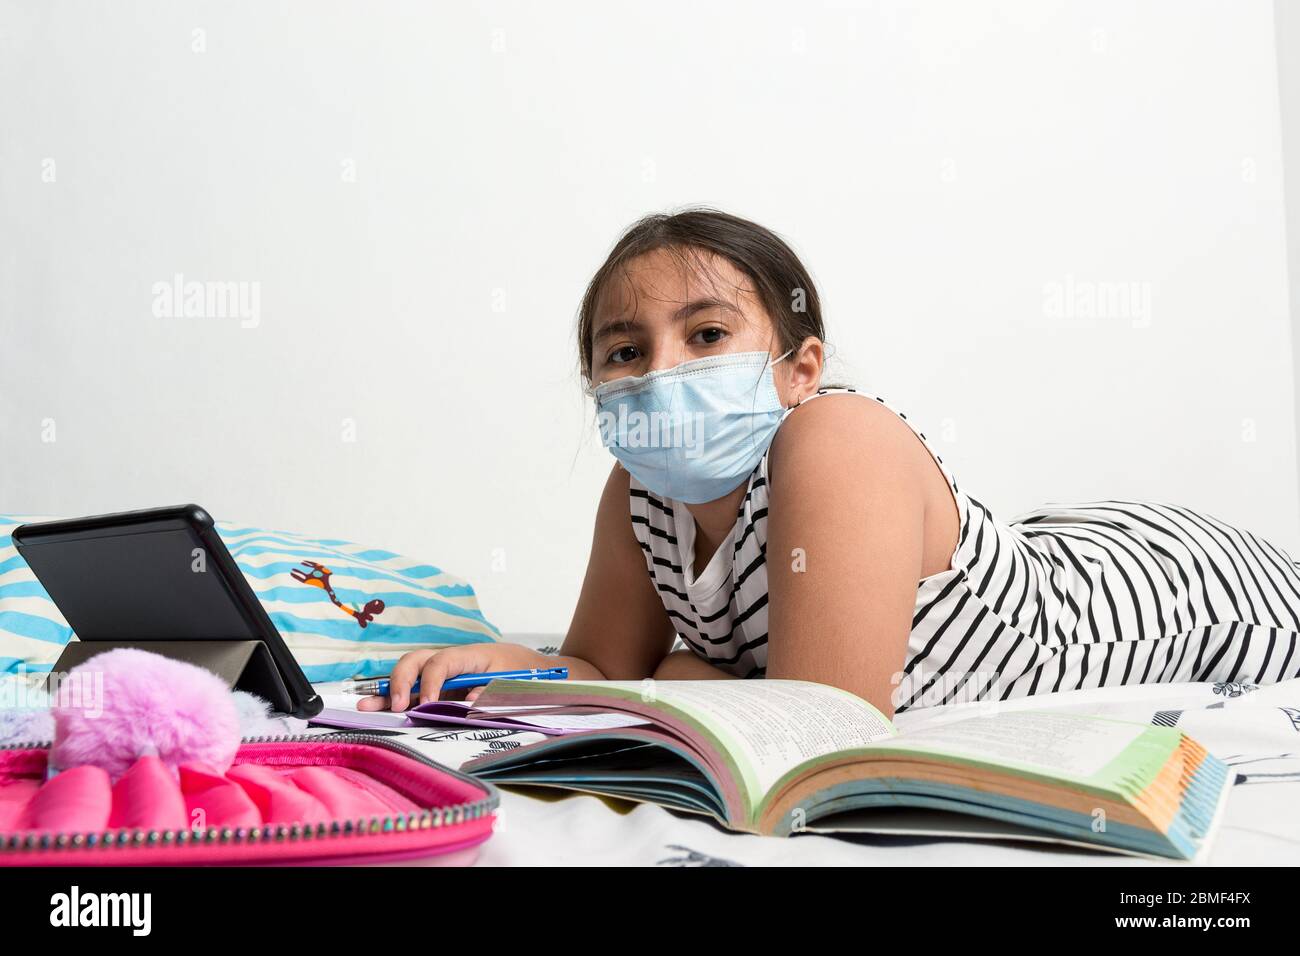 Young Asian girl wearing protective face mask laying on her bed studying - corona virus home schooling concept image with copy space for text Stock Photo